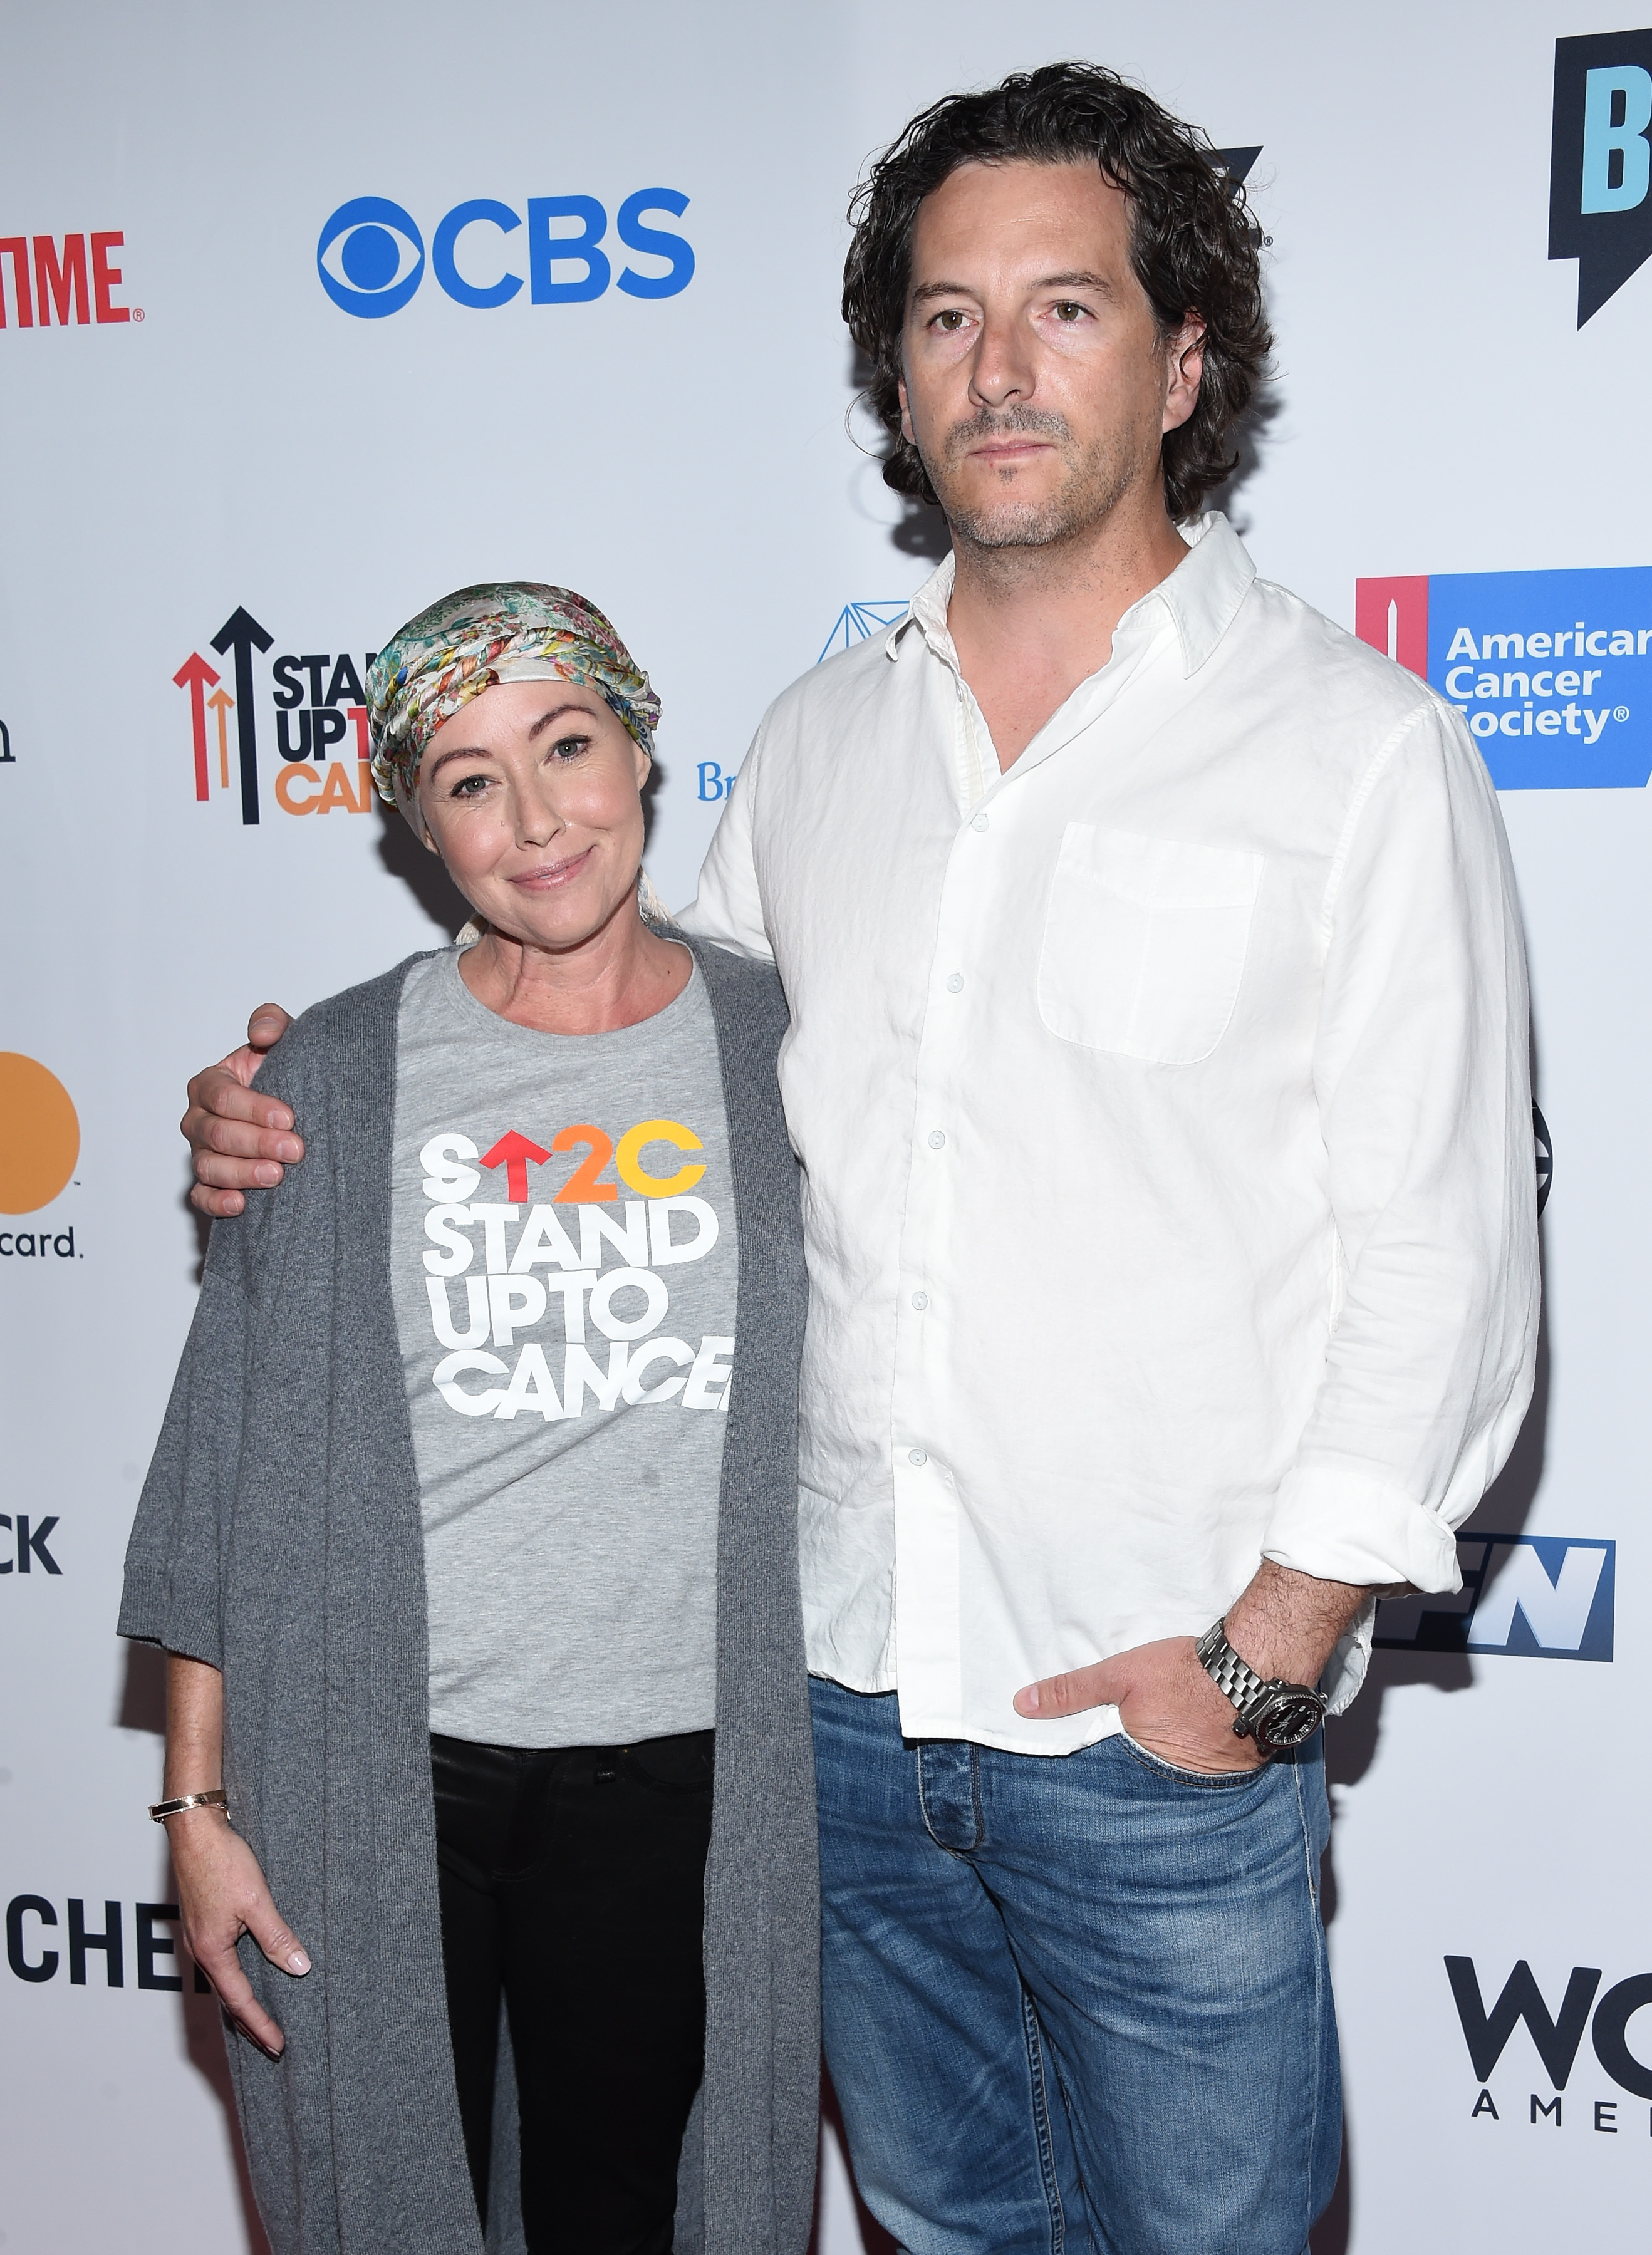 Actress Shannen Doherty and then-husband photographer Kurt Iswarienko at the Stand Up to Cancer event in Hollywood in 2016.